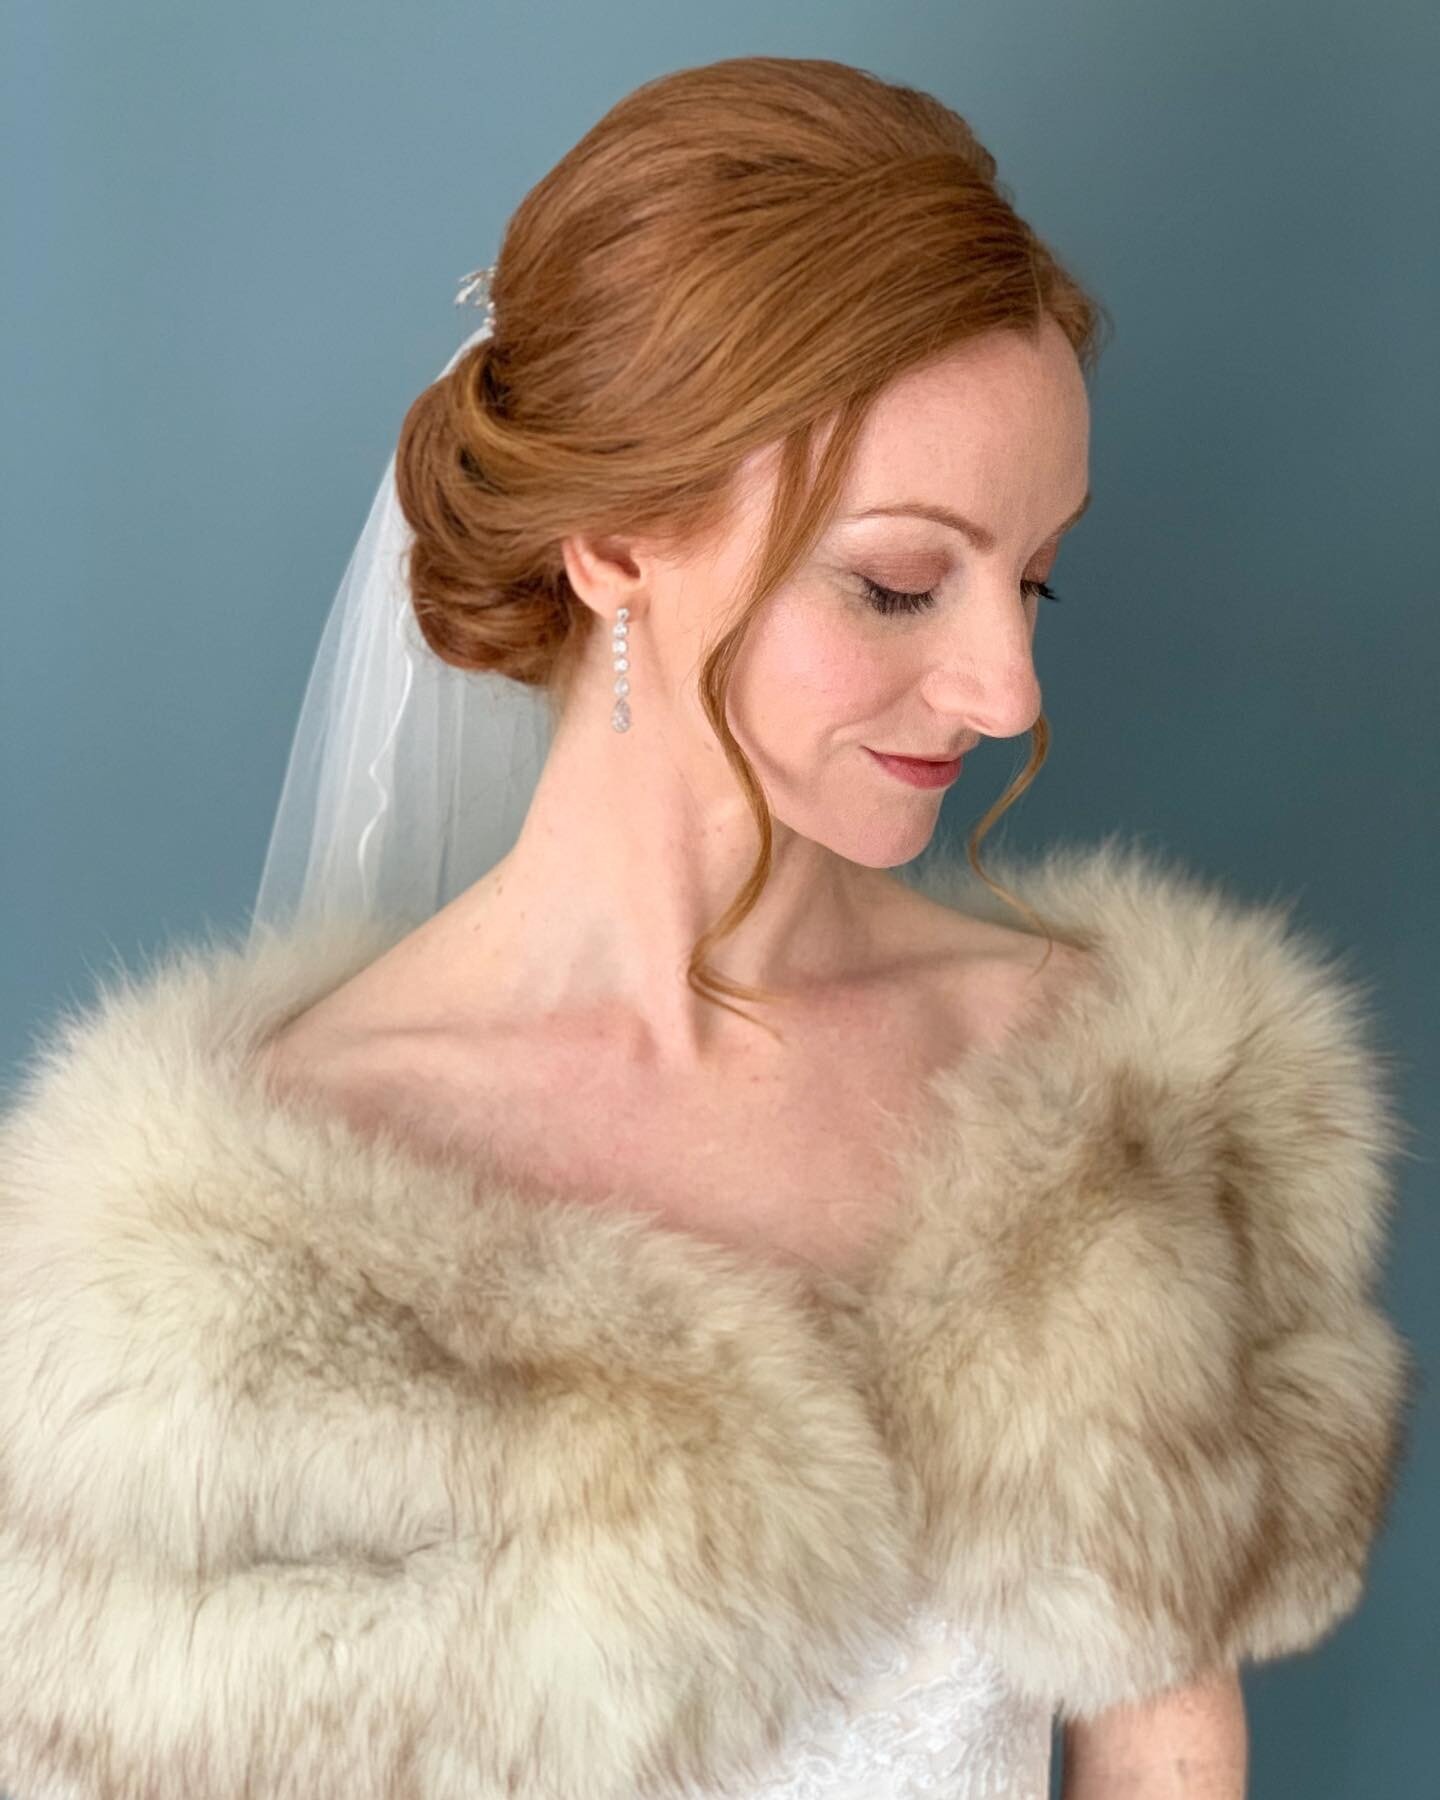 #tbt I&rsquo;m not just a hair and make-up artist, I take great shots on the day too 😊 (well try to)
I love this one I took of Kate on her wedding day!
Hair &amp; make-up by me 💄
.
.
.
#throwbackthursday #brideportraits #brideontheday #bridehairand